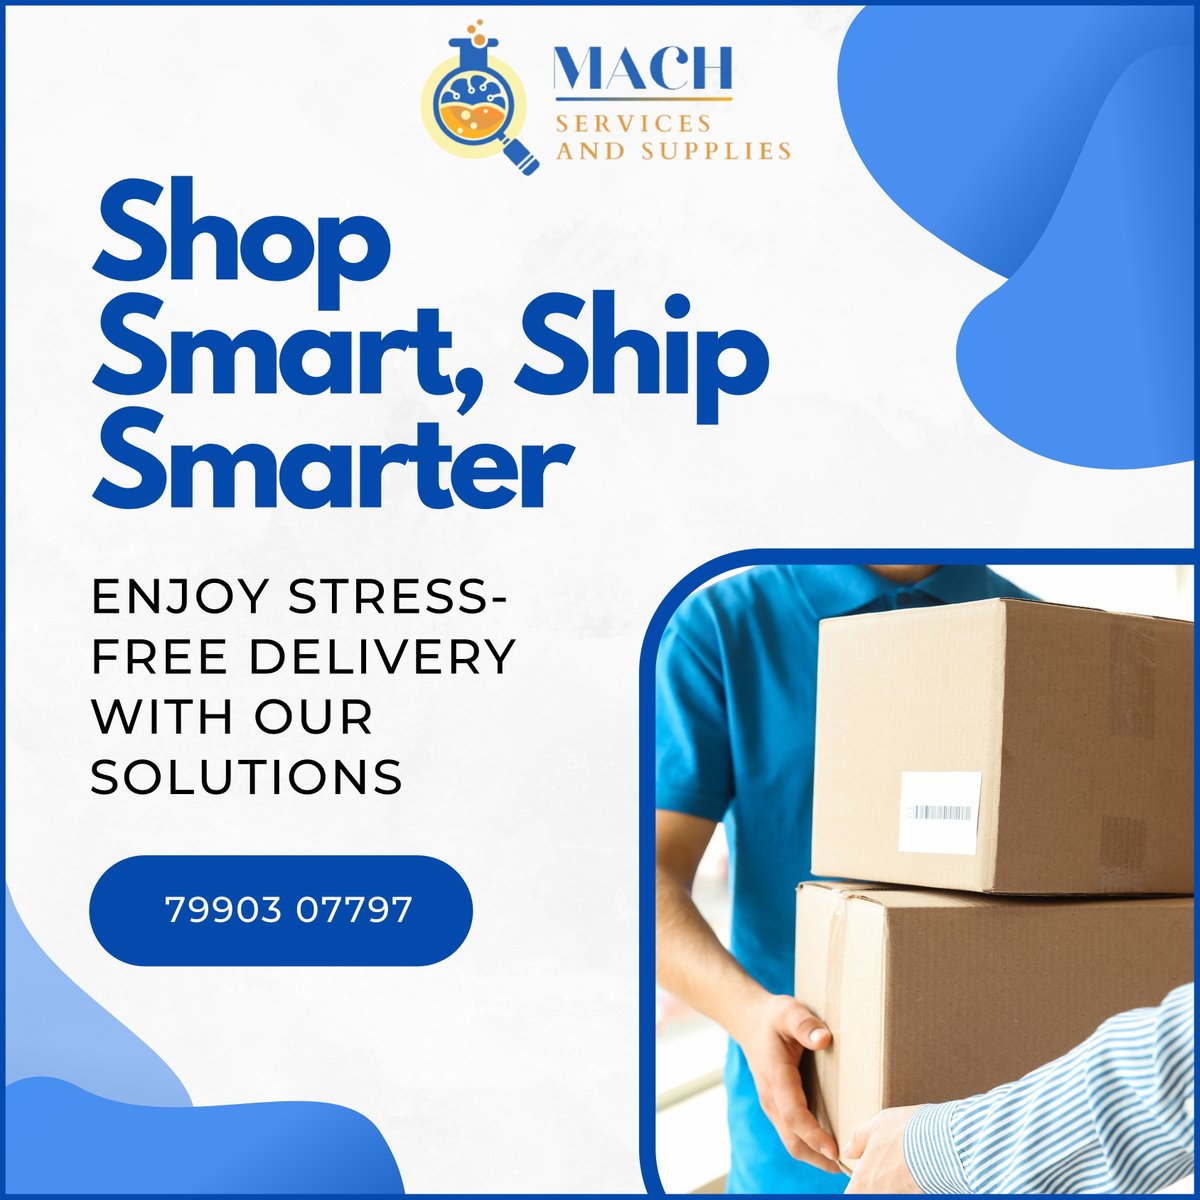 'Shop Online, Ship with Confidence: Your Satisfaction, Our Priority.'
.
.
#delivery #machservicesandsupplies #machservices #deliveryservice #style #love #instagood #like #photography #motivation #motivationalquotes #inspiration #surat #suratcity #suratfood #suratphotoclub #grow